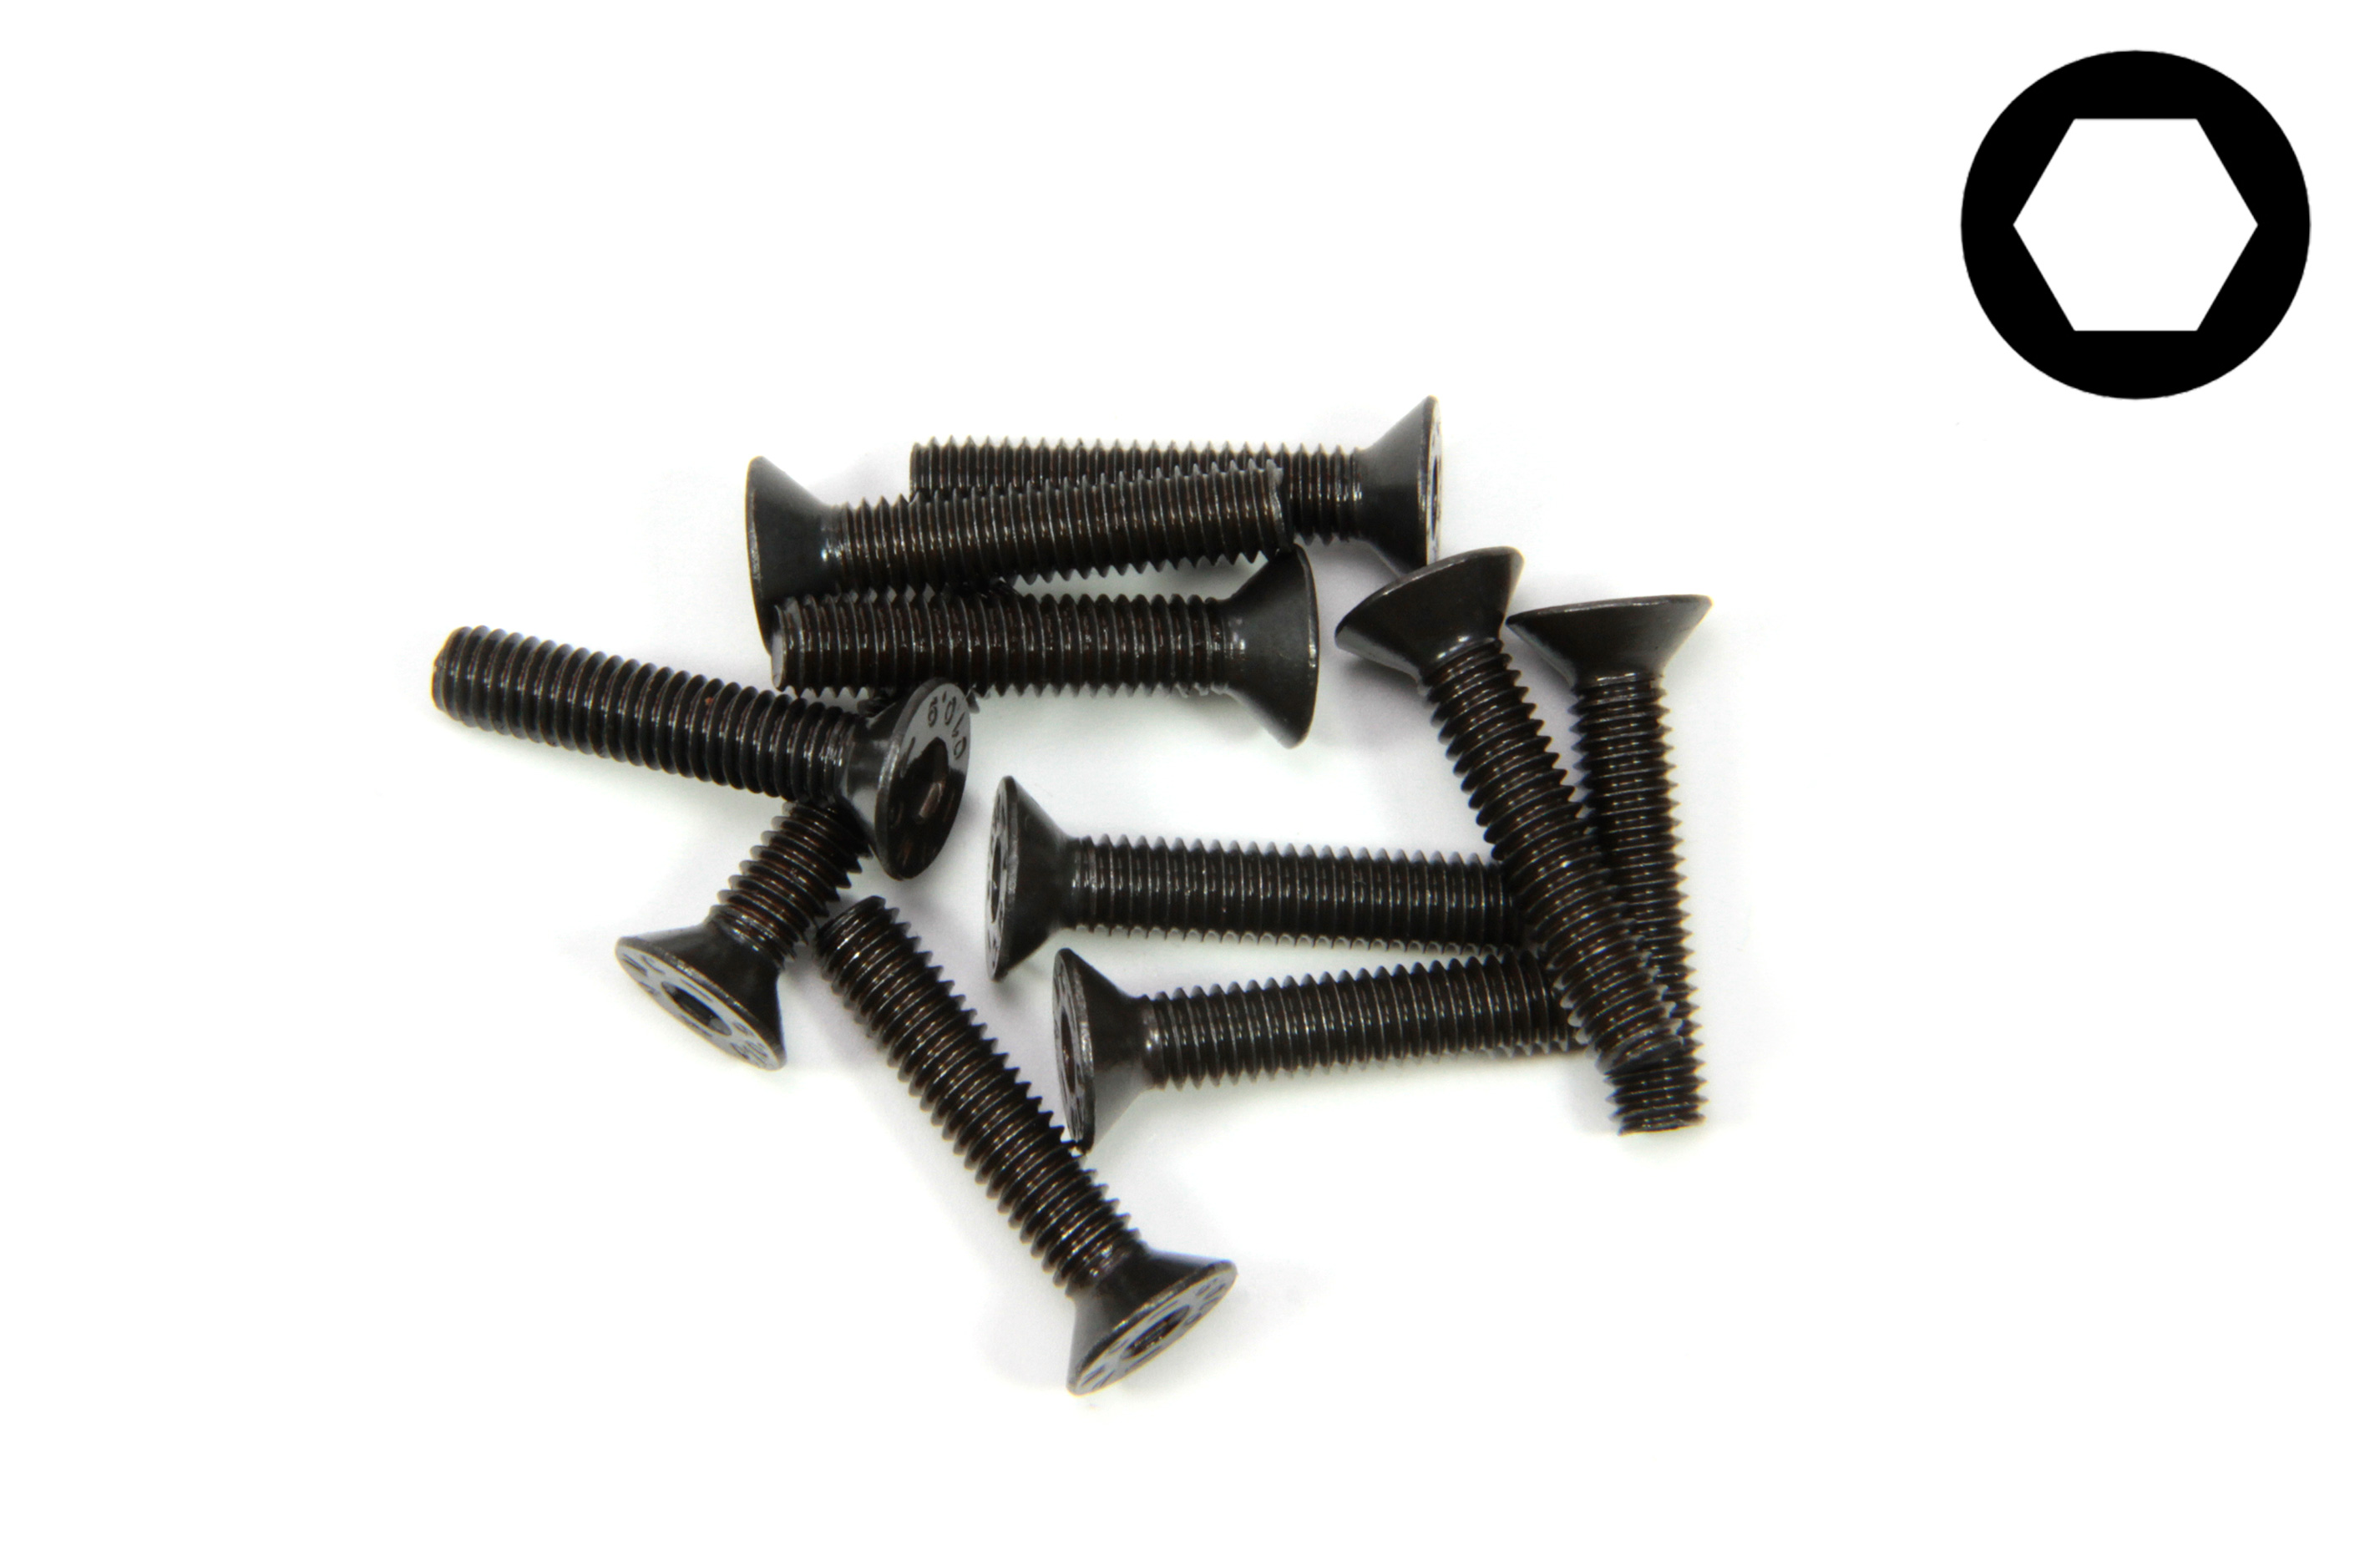 y6720/20-10.9 Countersunk screw M4x20 mm, strength 10.9, 10 pieces